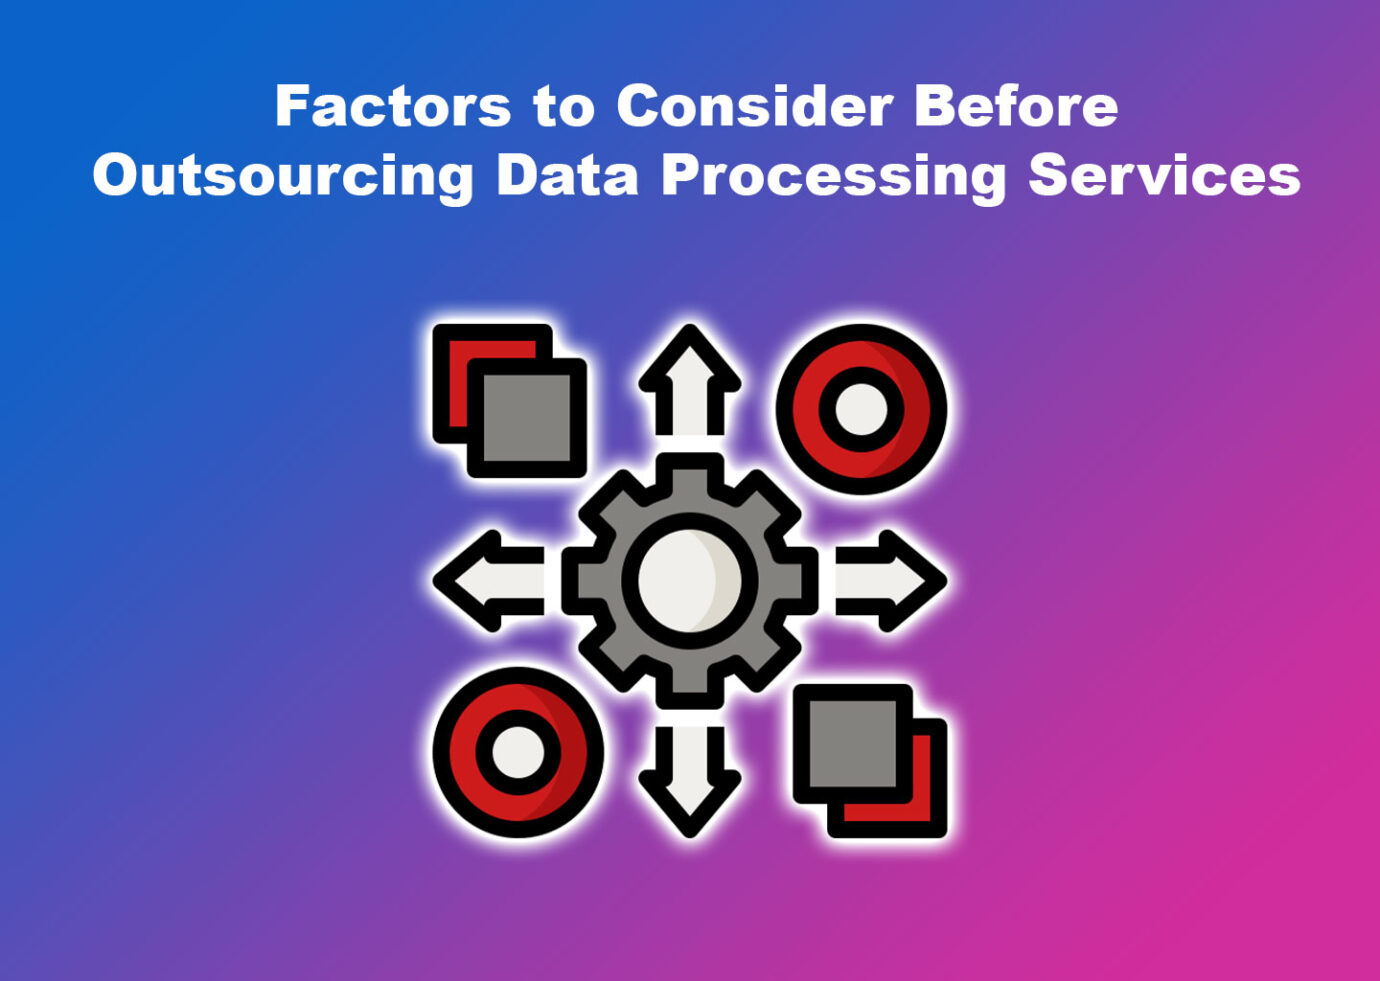 Factors to Consider Before Outsourcing Data Processing Services